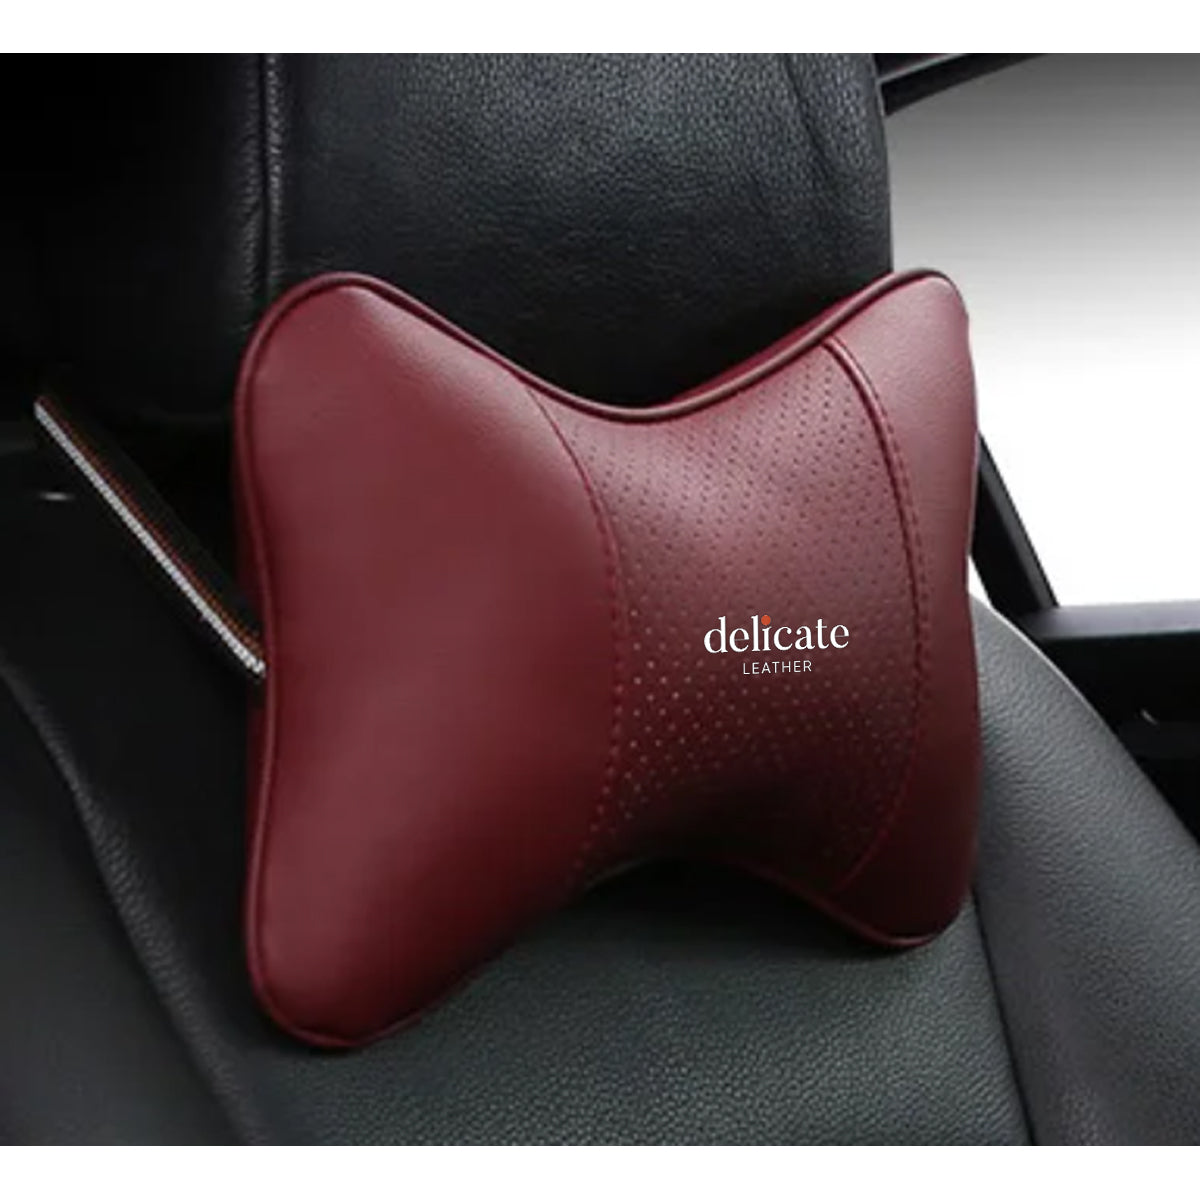 Universal Car Neck Pillow for Comfortable Support - Compatible with Most Auto Accessories and Filled with Fiber Material - Delicate Leather